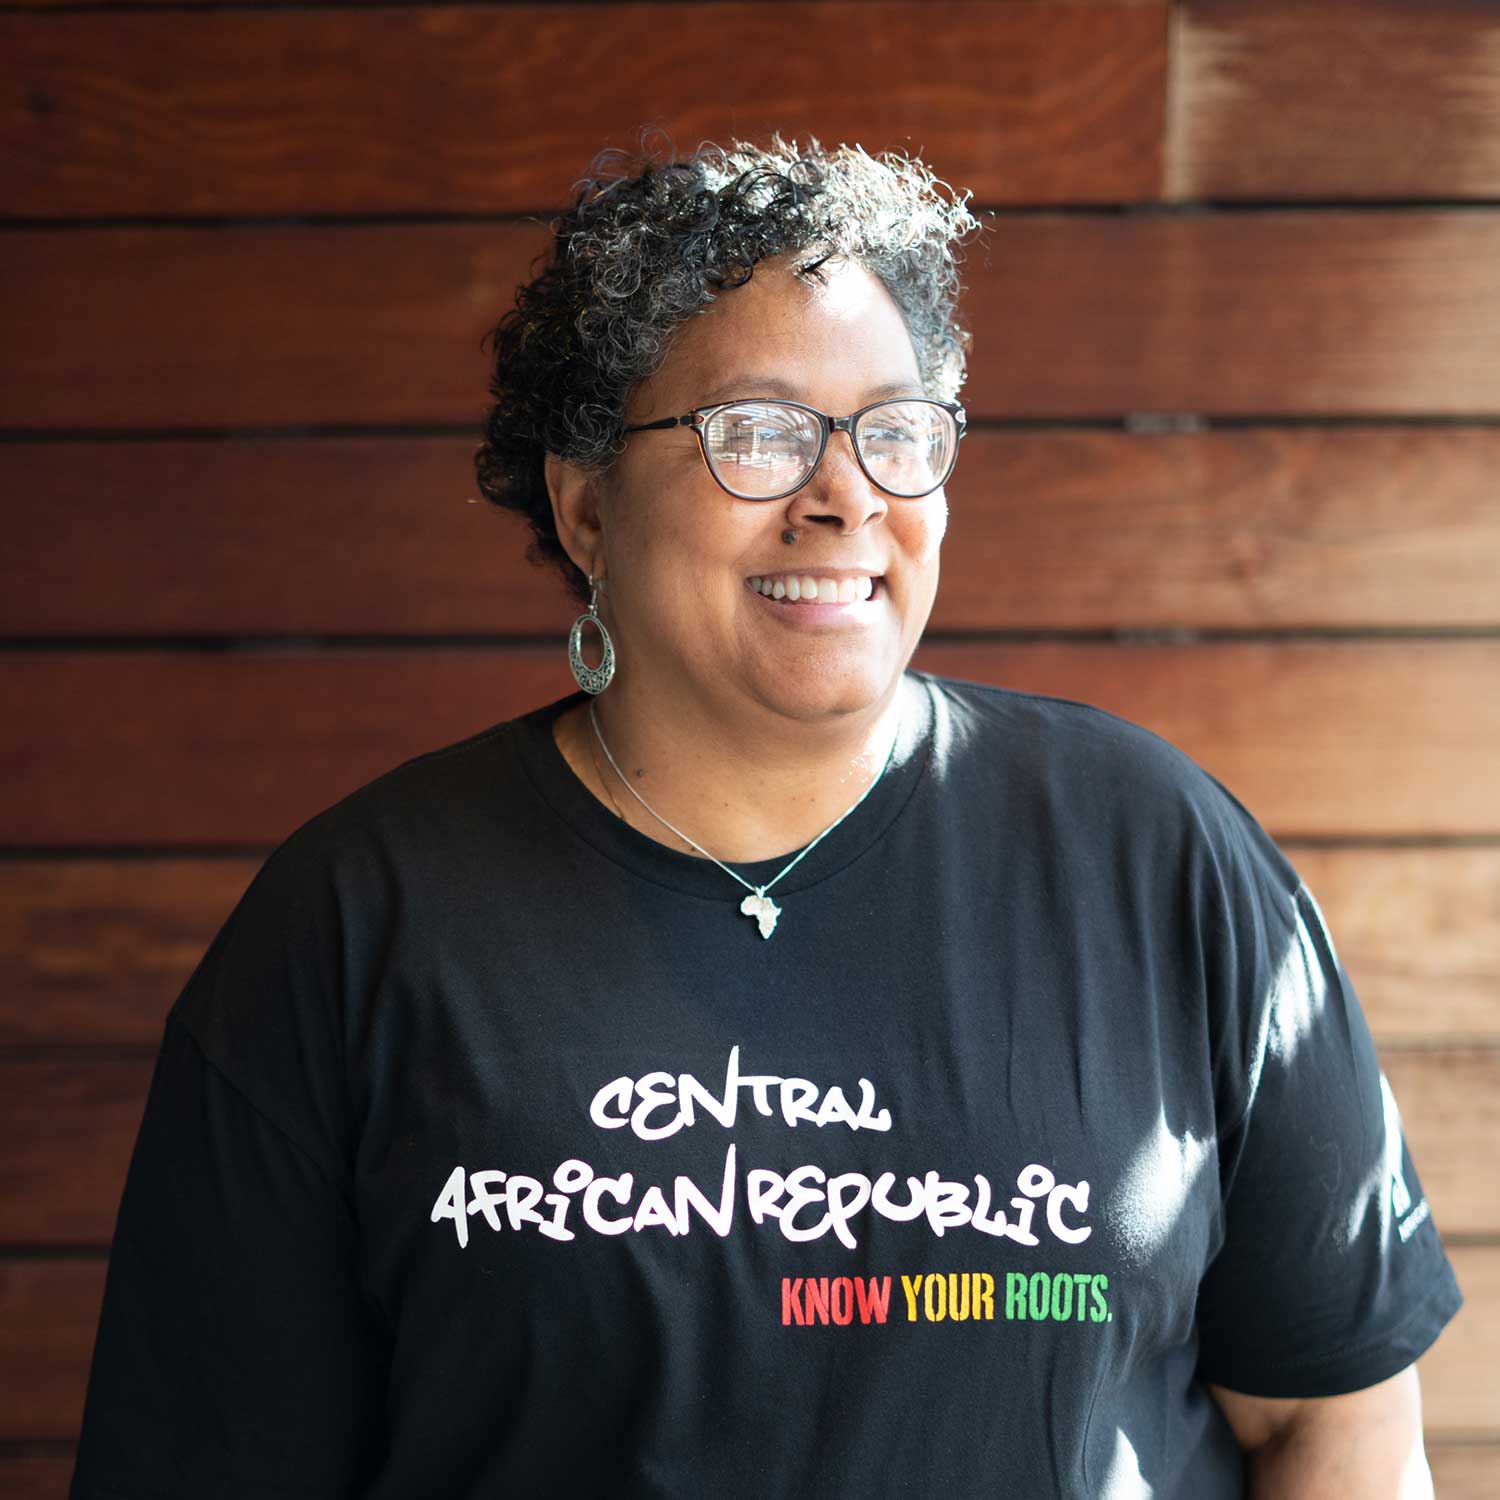  African American Woman wearing a Central African Republic T-Shirt with the words "Know Your Roots" in African Colors